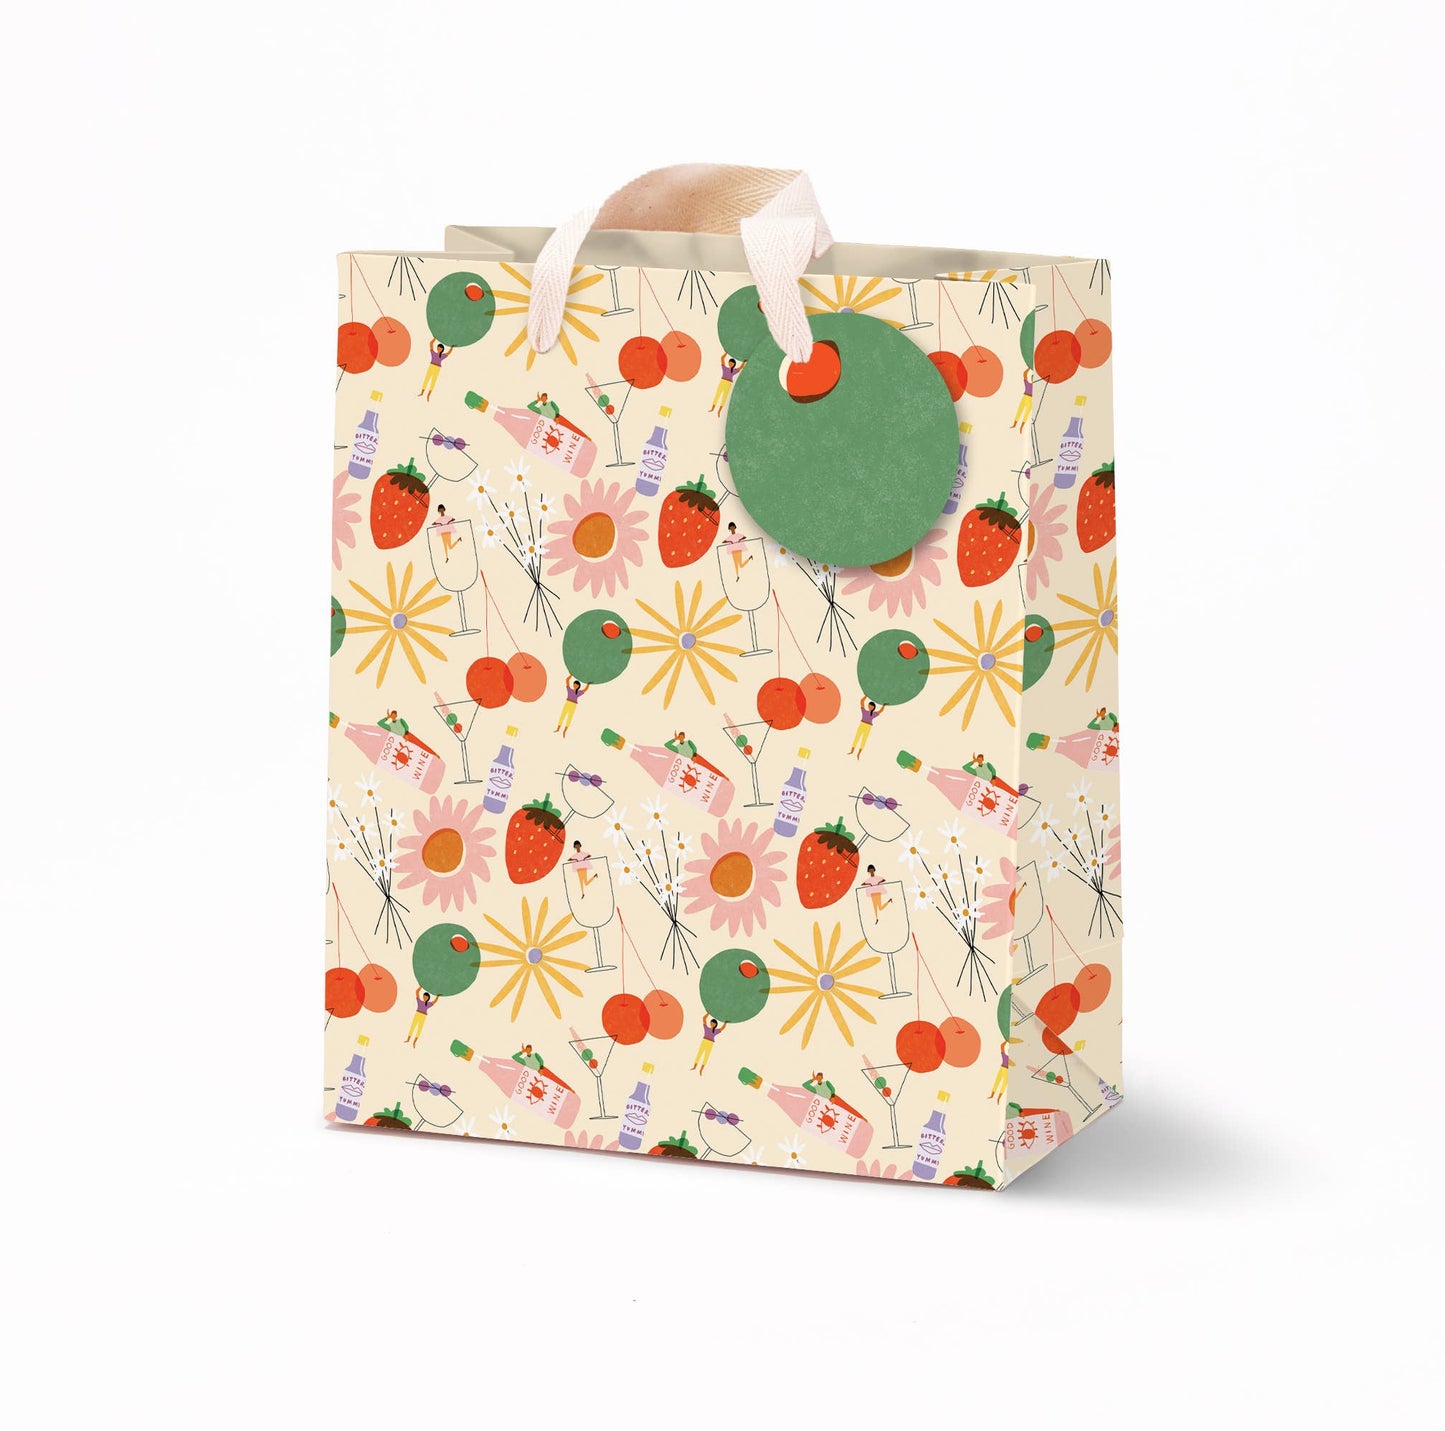 Gift bag designed with vibrant colored, strawberries, cherries, olives, flowers, wine bottles and various cocktail glasses, all on a white background. Gift tag attached to bag is a green olive. 